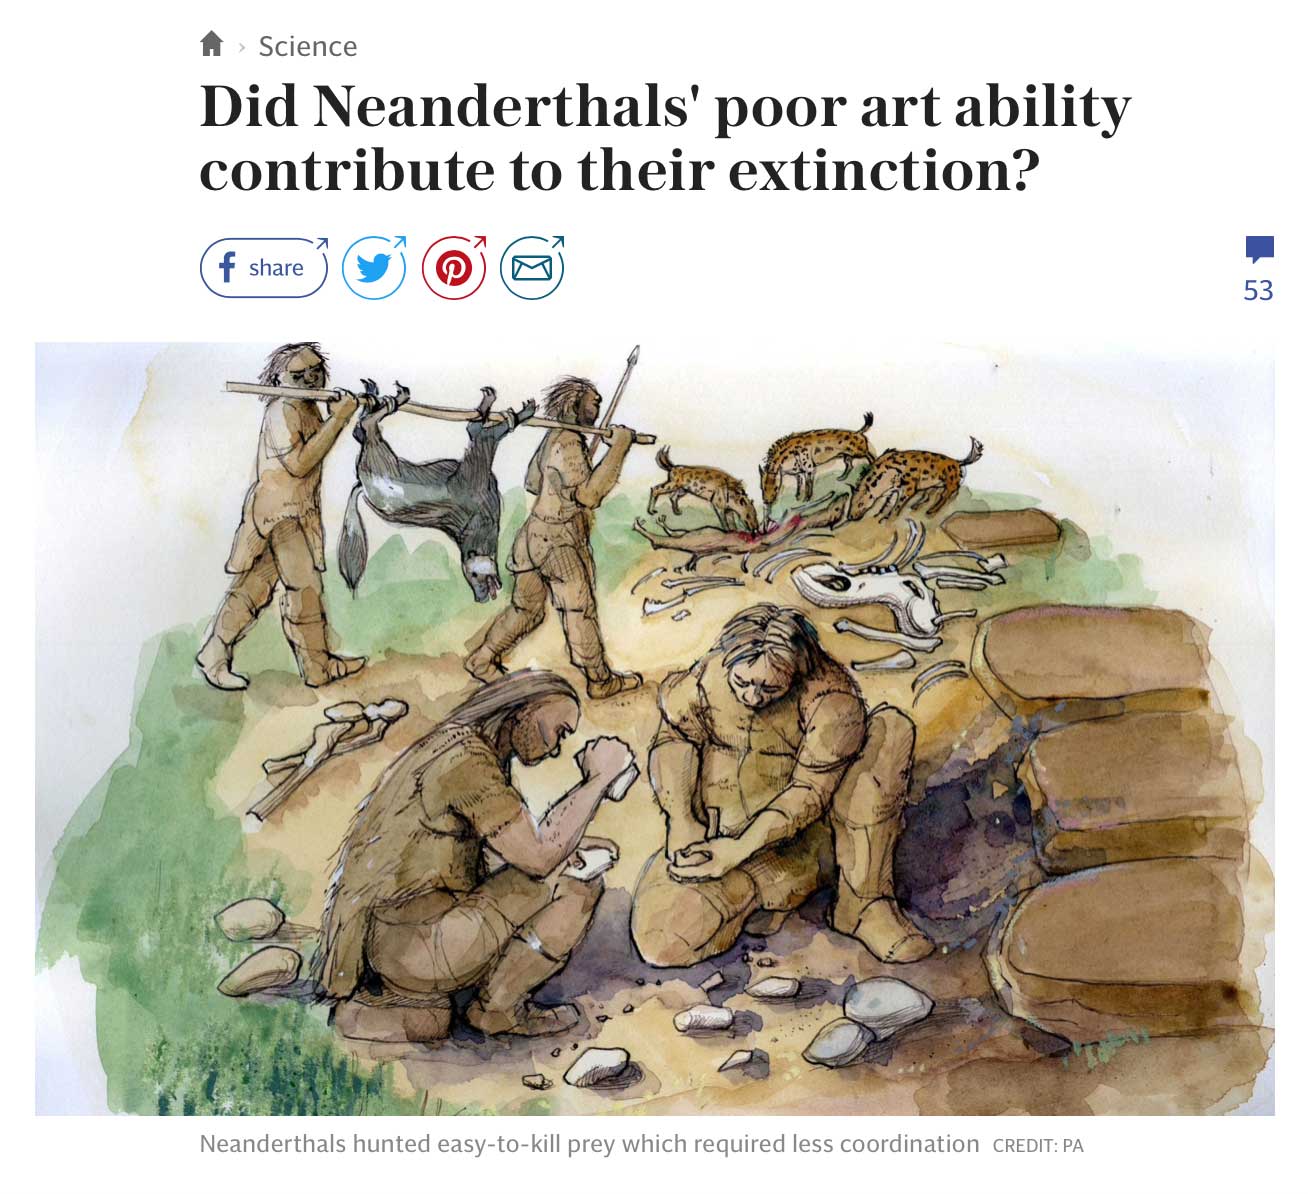 Headline: "Did Neanderthals' poor art ability contribute to their extinction?" with drawing of Neandertals.